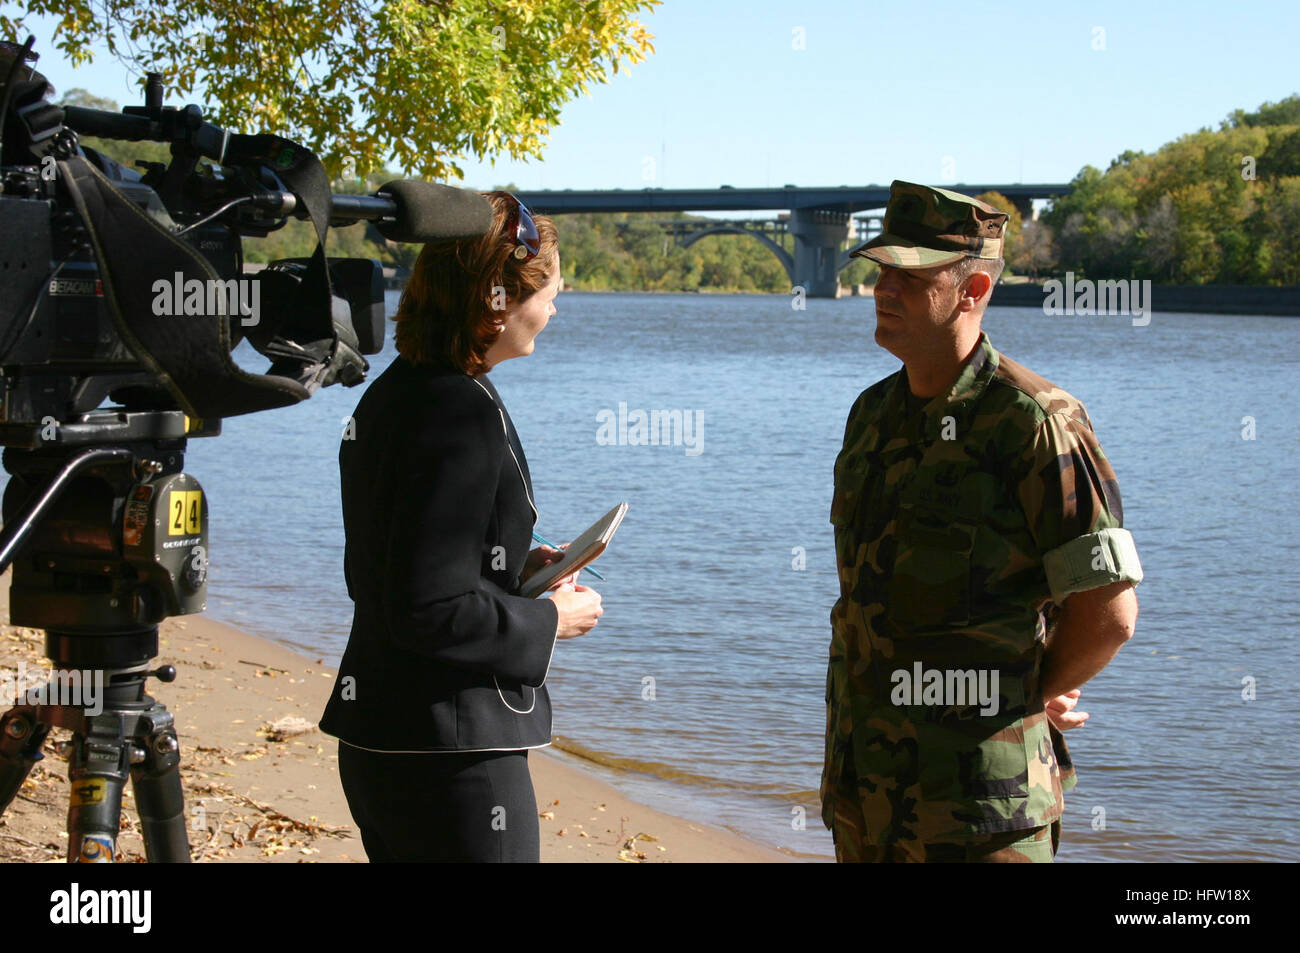 071003-N-7163S-001 MINNEAPOLIS (Oct. 3, 2007) - Cmdr. Dan Shultz, commanding officer of Mobile Diving and Salvage Unit (MDSU) 2, interviews with KSTP-TV reporter Colleen Mahoney along the banks of the Mississippi River near downtown Minneapolis. MDSU-2 returned to the area to participate in Twin Cities Navy Week after spending much of August assisting local, state and federal authorities with finding missing victims in the wake of the I-35W bridge collapse. Navy Weeks are designed to show Americans the investment they have made in their Navy and to increase awareness of the Navy in cities that Stock Photo